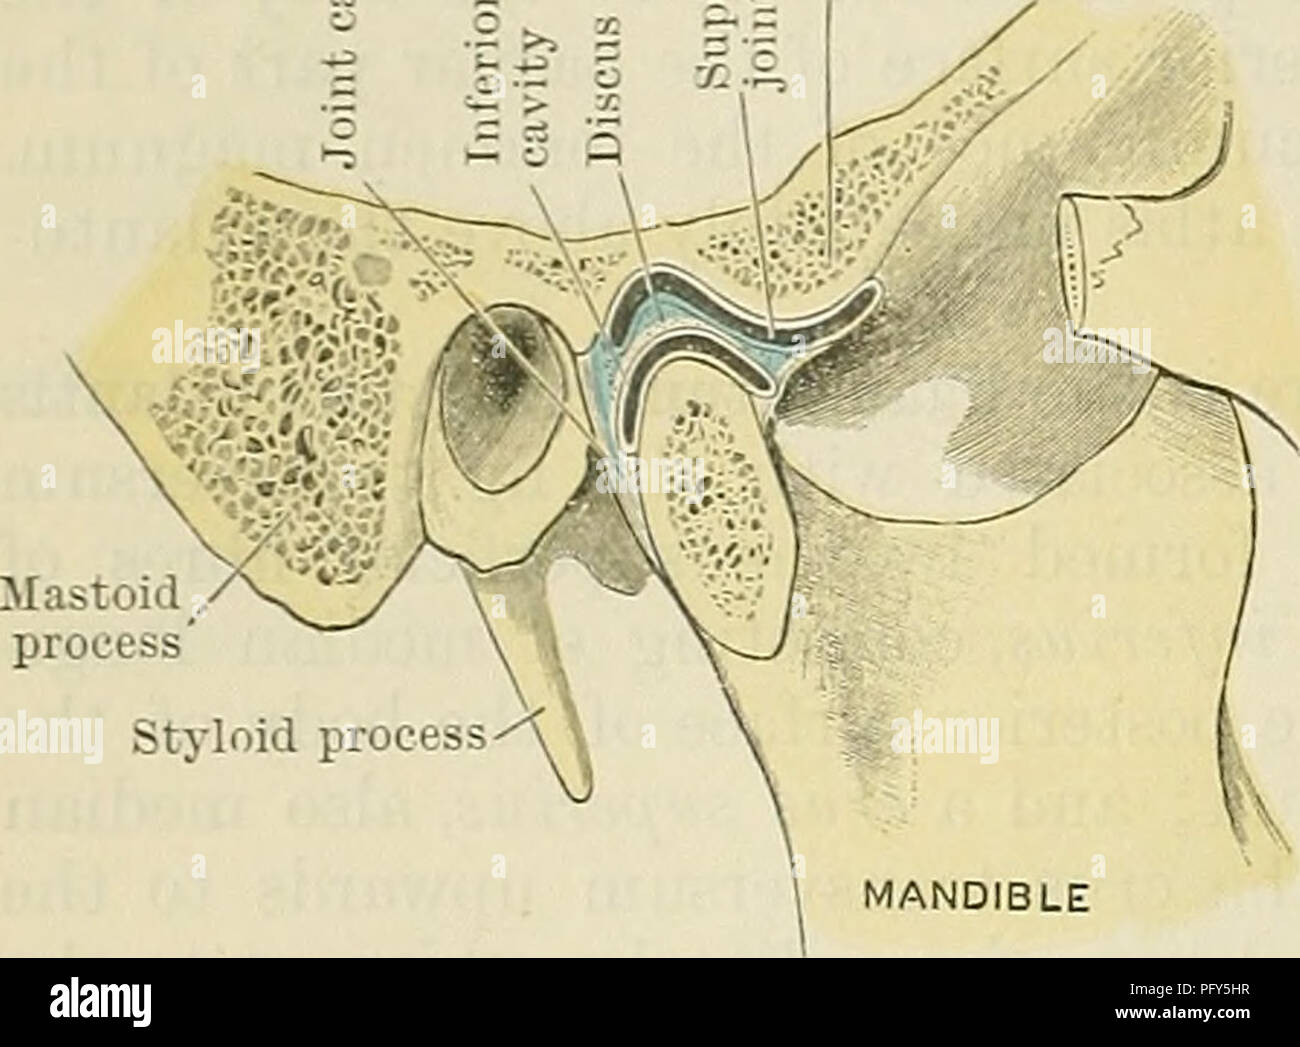 . Cunningham's Text-book of anatomy. Anatomy. 312 THE ARTICULATION'S OE JOINTS. ARTICULATIO MANDIBULARS. - &gt; o a P &quot; Tuberculum articulare. Fig. 299.—Section through the Mandibular Joint. The mandibular joint (O.T. temporomandibular) is an arthrodial diarthrosis. It occurs between the mandibular fossa of the temporal bone and the condyle of the mandible. These two articular surfaces are markedly dissimilar both in size and shape. In its general outline the articular surface of the head of the mandible is cylindrical, having its long axis directed from the medial side laterally and forw Stock Photo